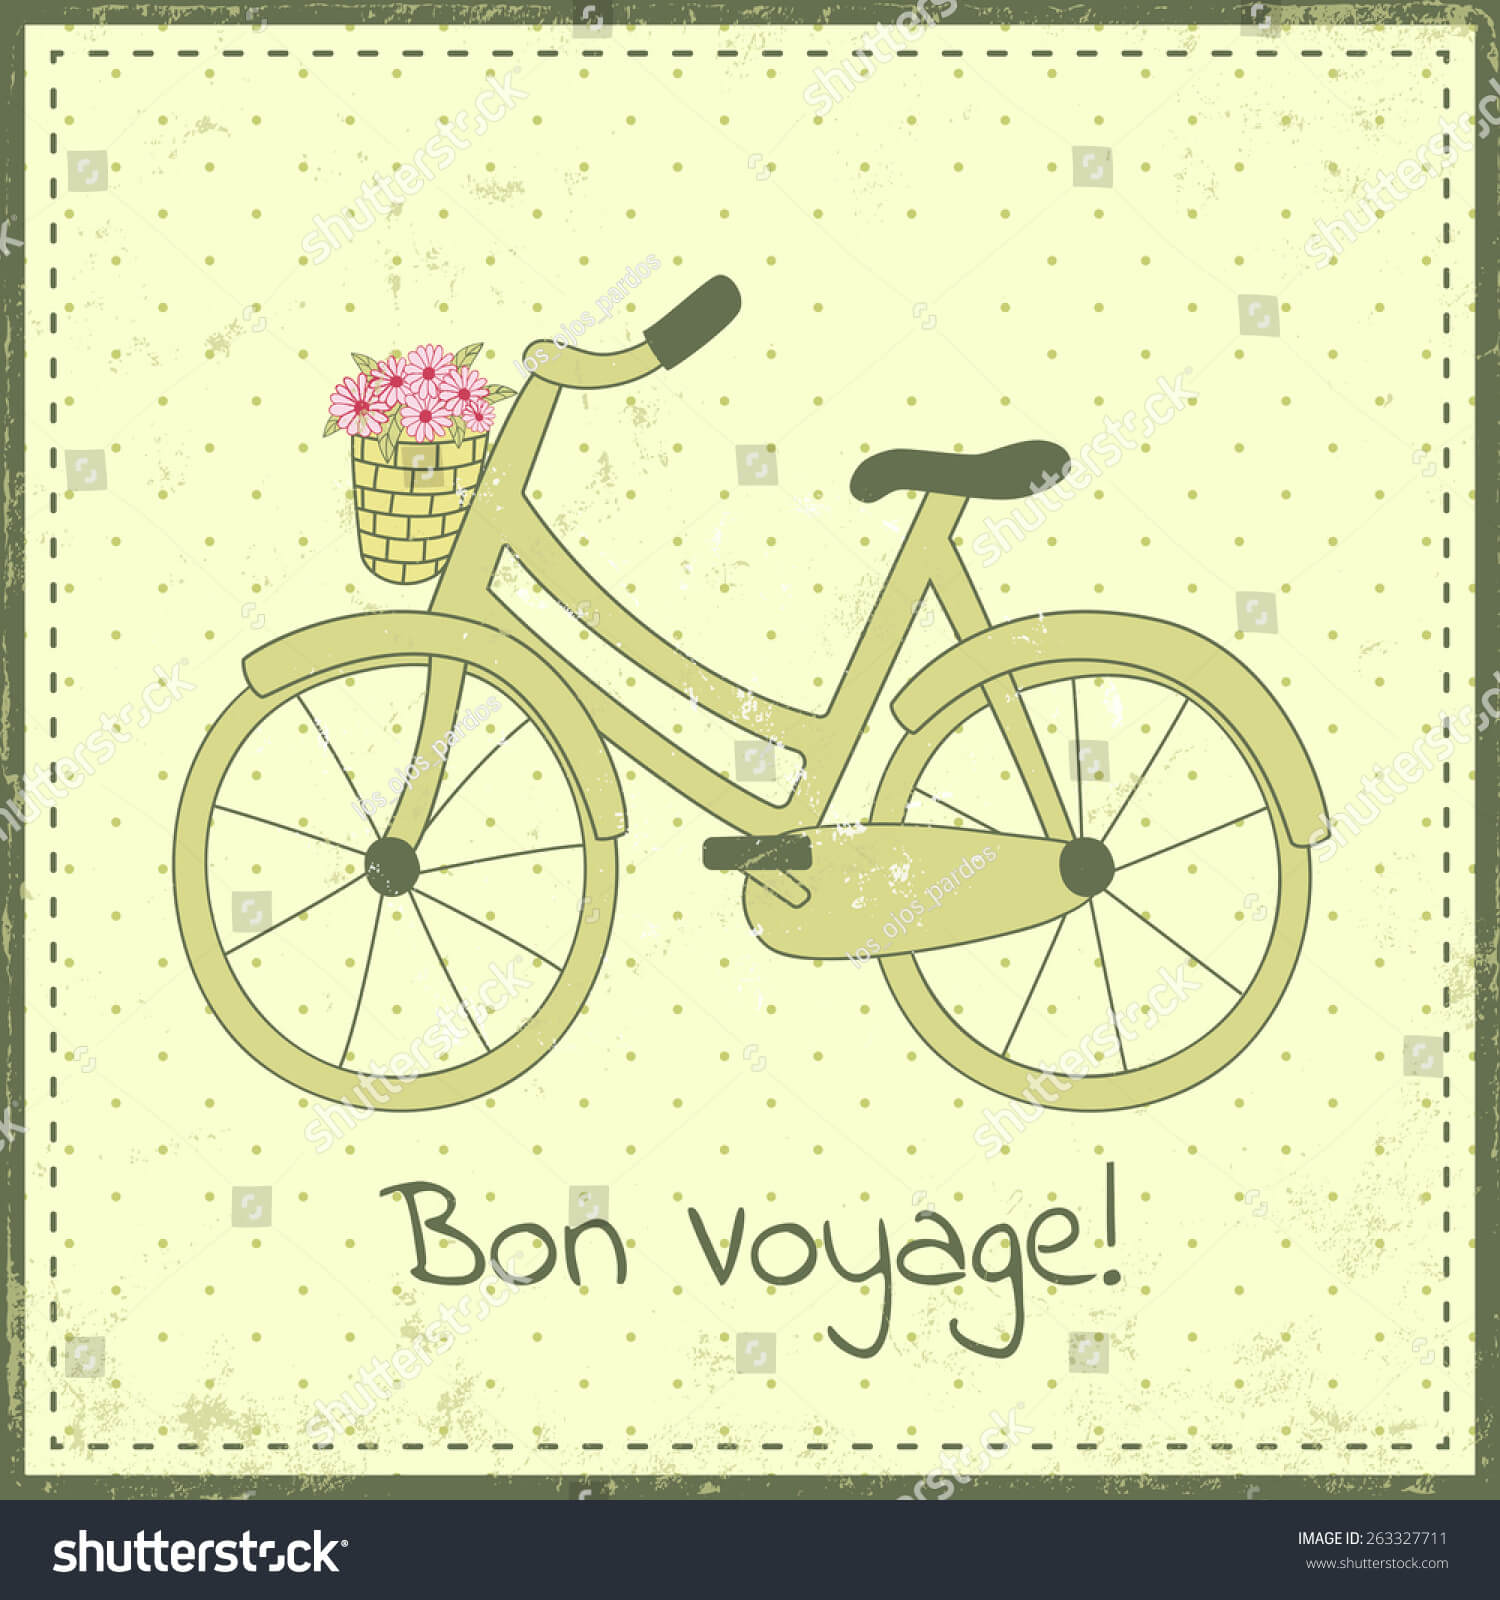 Greeting Card Template Bike Illustration Bon Stock Vector Intended For Bon Voyage Card Template